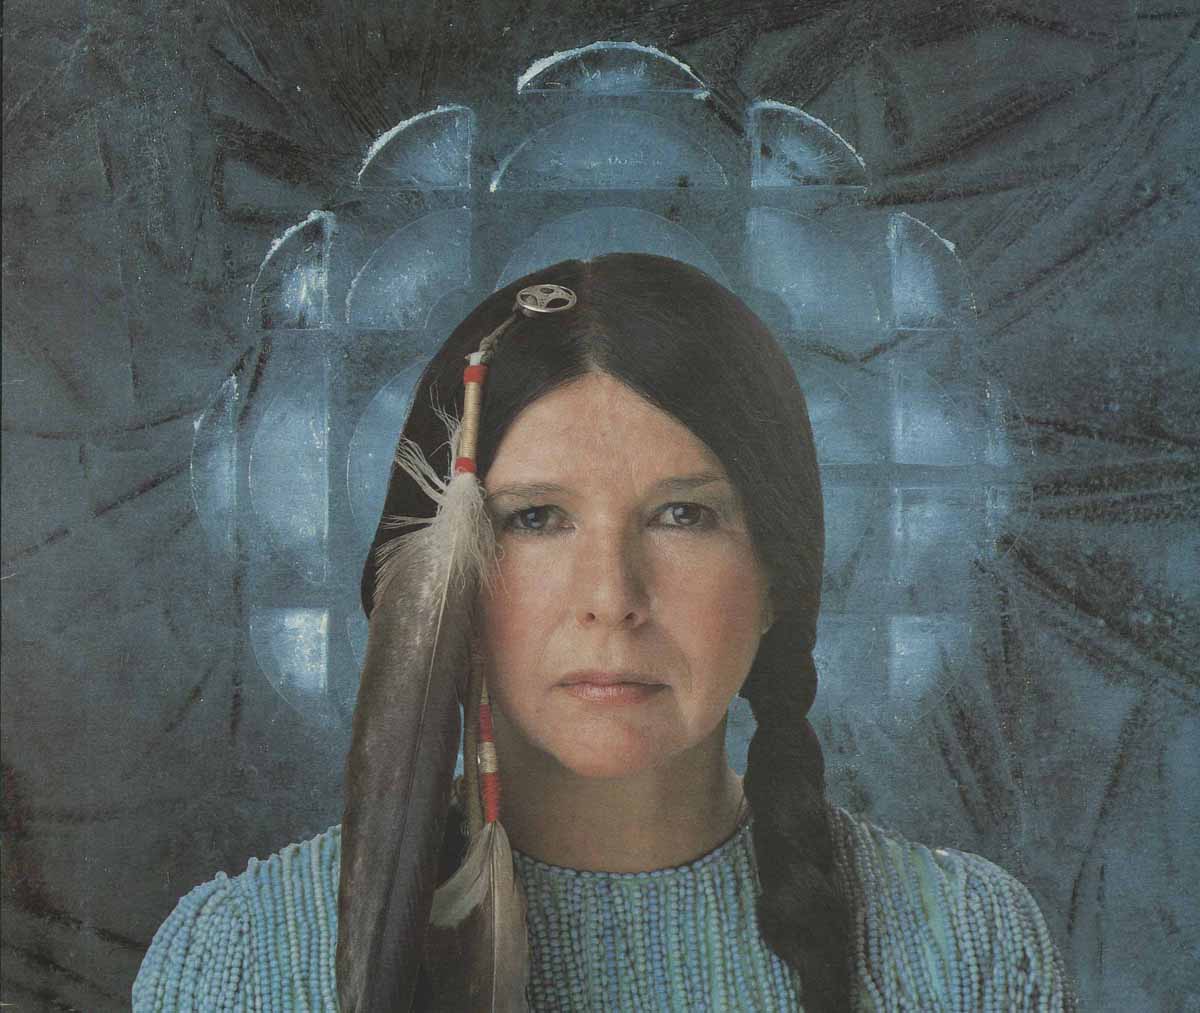 Listen to Alanis Obomsawin's 'Bush Lady' via The Museum of Canadian Music